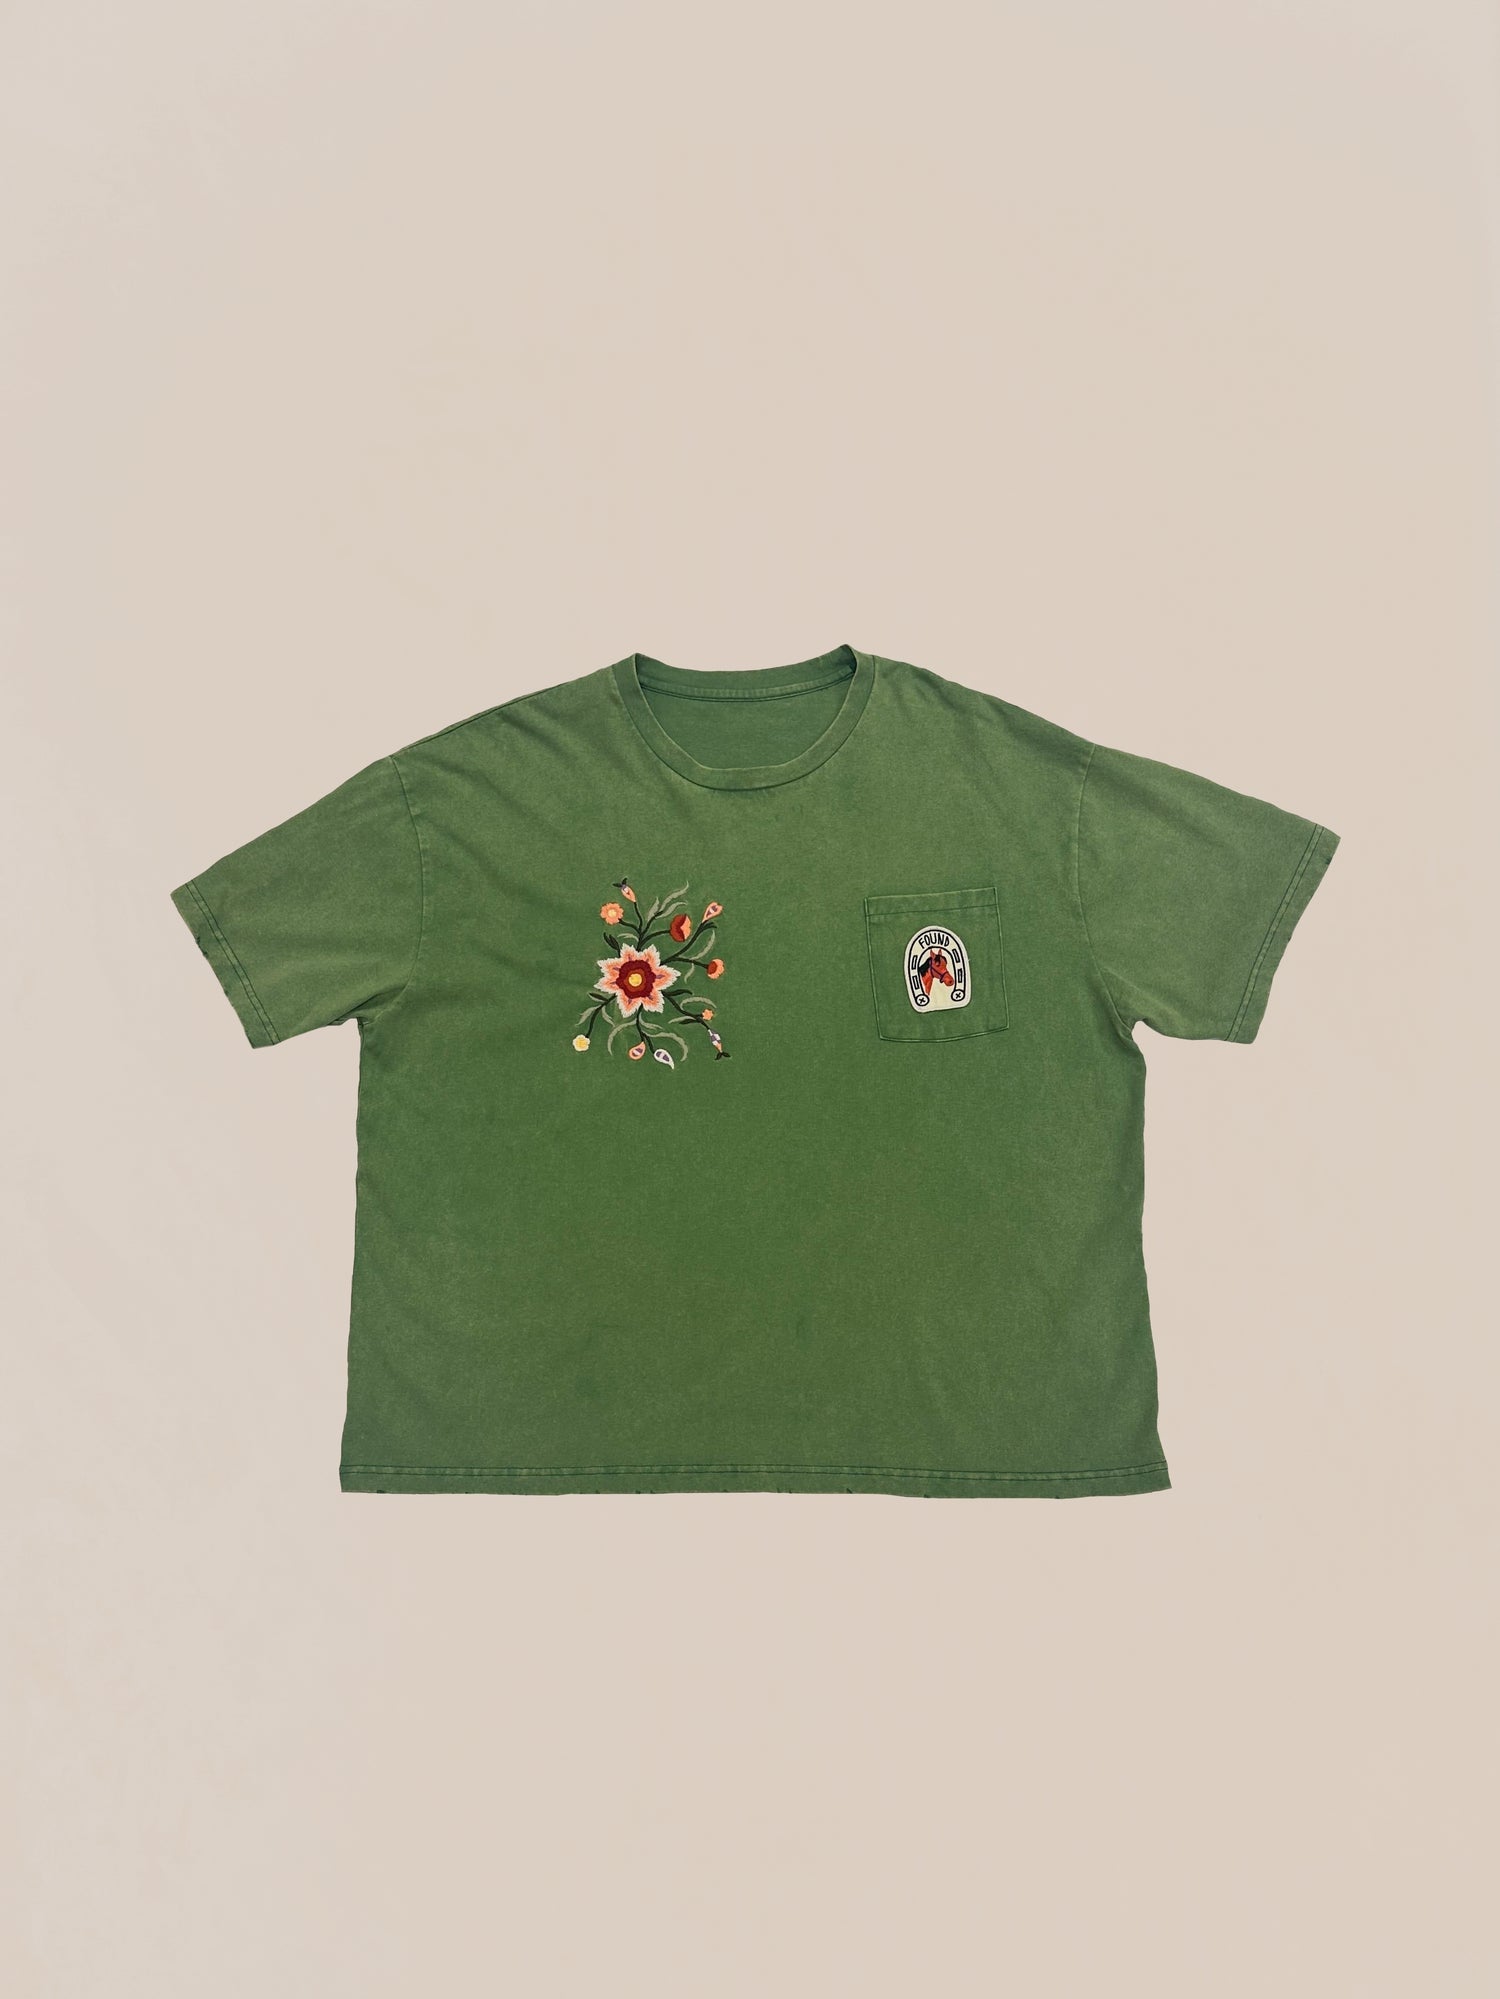 A green Profound 100% Cotton Sample 78 (Pine Needle Farm Tee) with embroidered flower design and a patch on the chest laid flat on a light background.